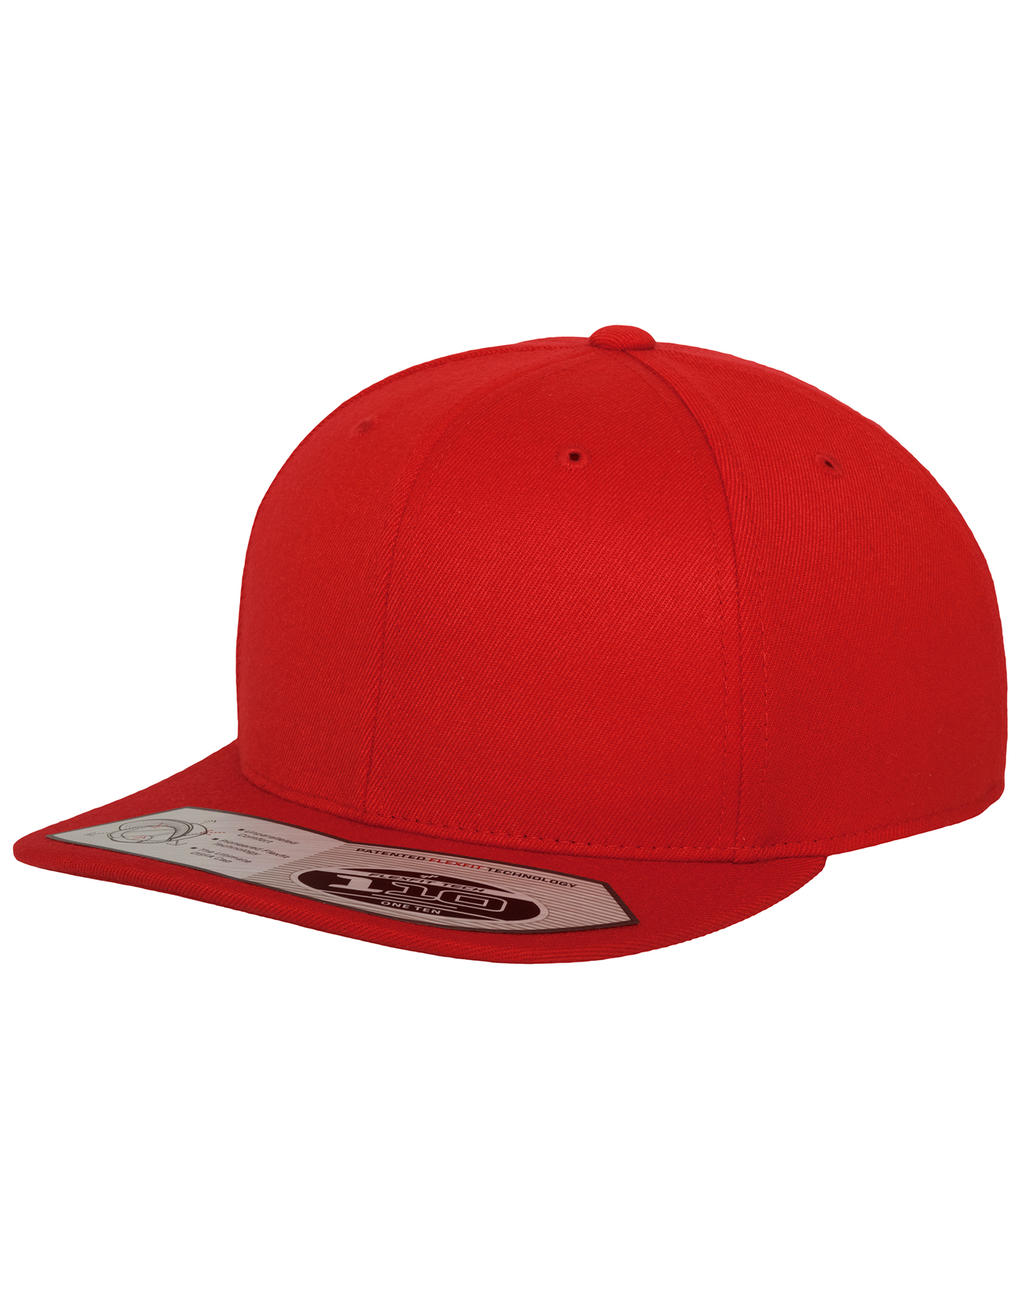  Fitted Snapback in Farbe White